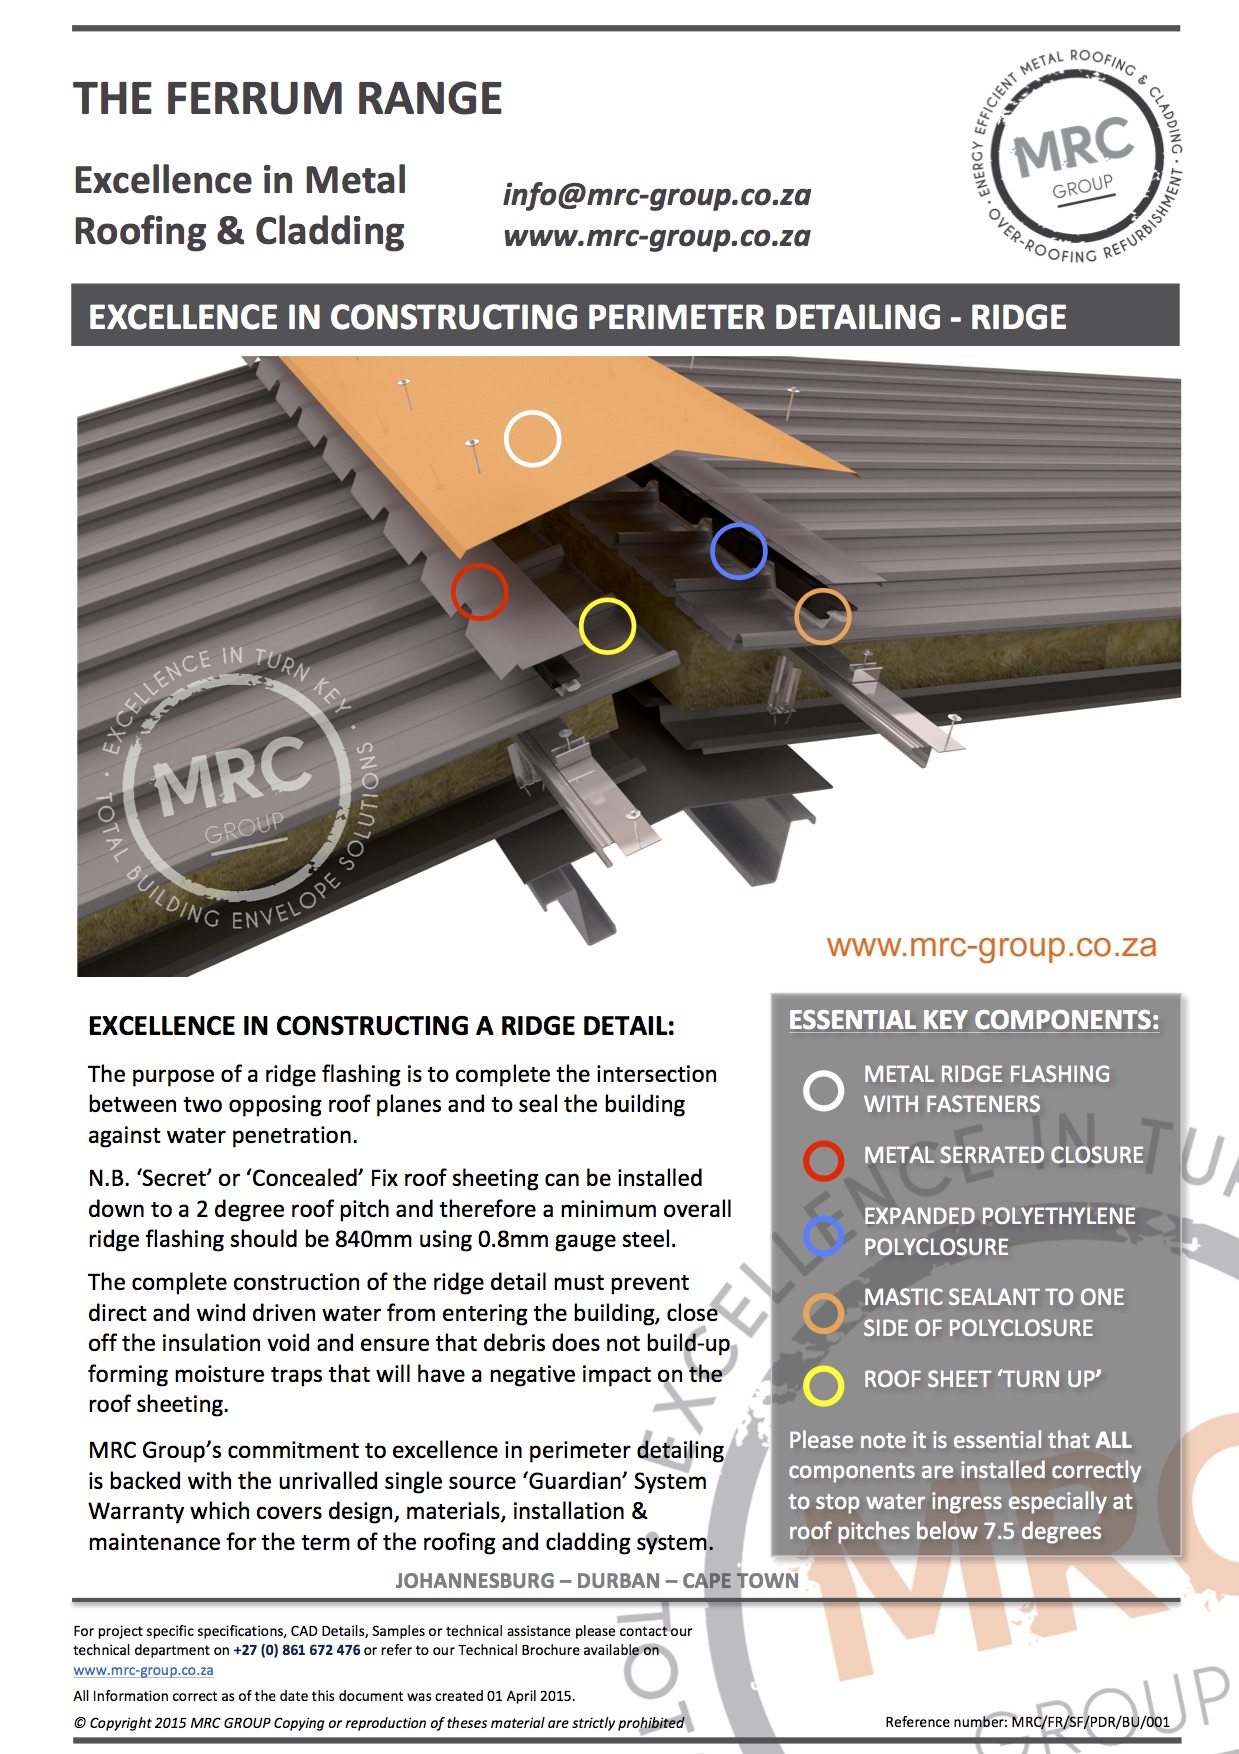 MRC Group Perimeter Detailing Ridge Secret Fix Metal Roofing backed with the Guardian System Warranty Data Sheet June 2015